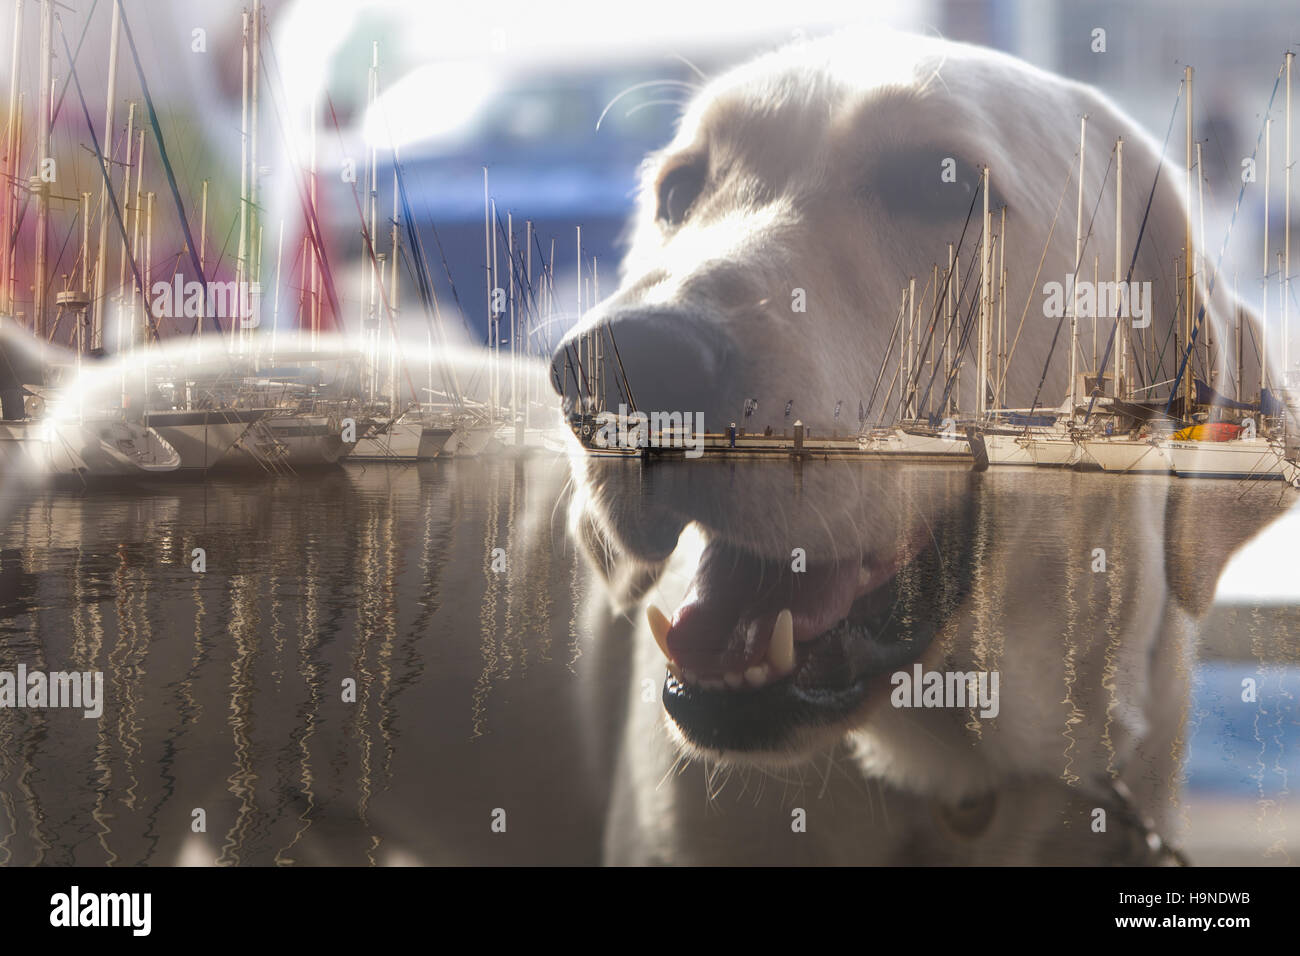 double exposure of guide dog and marina Stock Photo